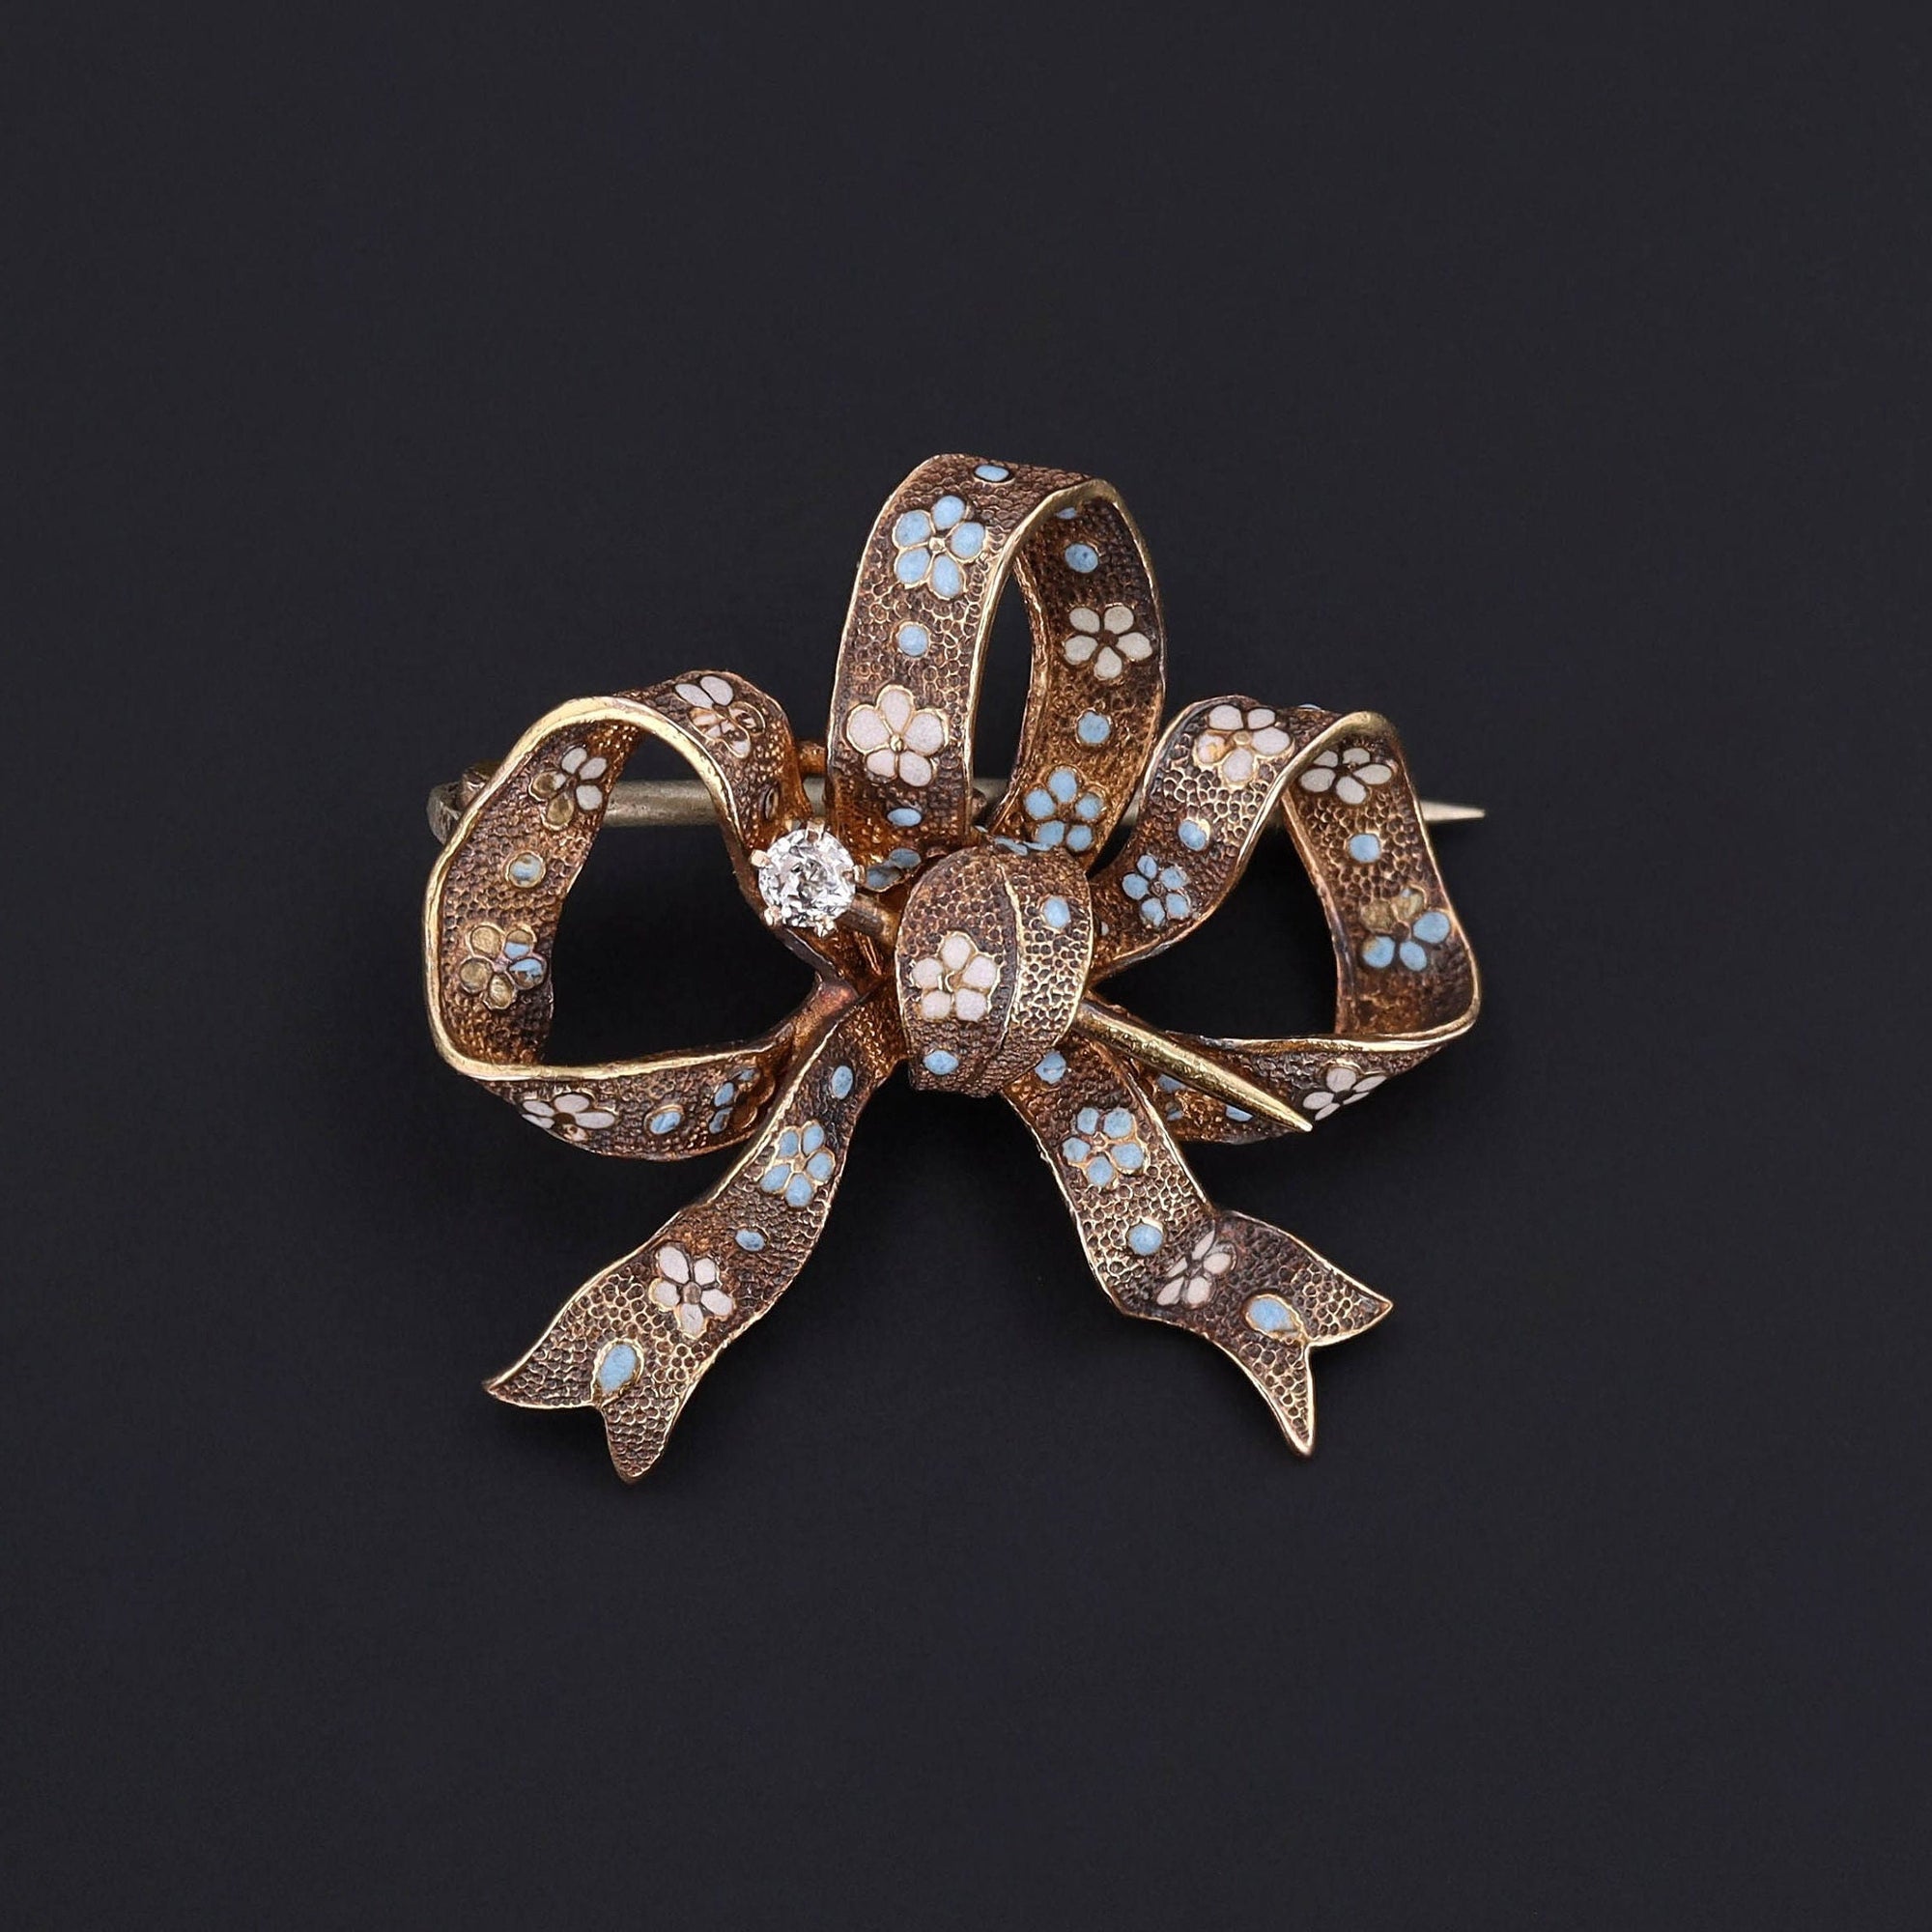 Antique Estate Bow Brooch of 14k Gold with Enamel Flowers and a Diamond